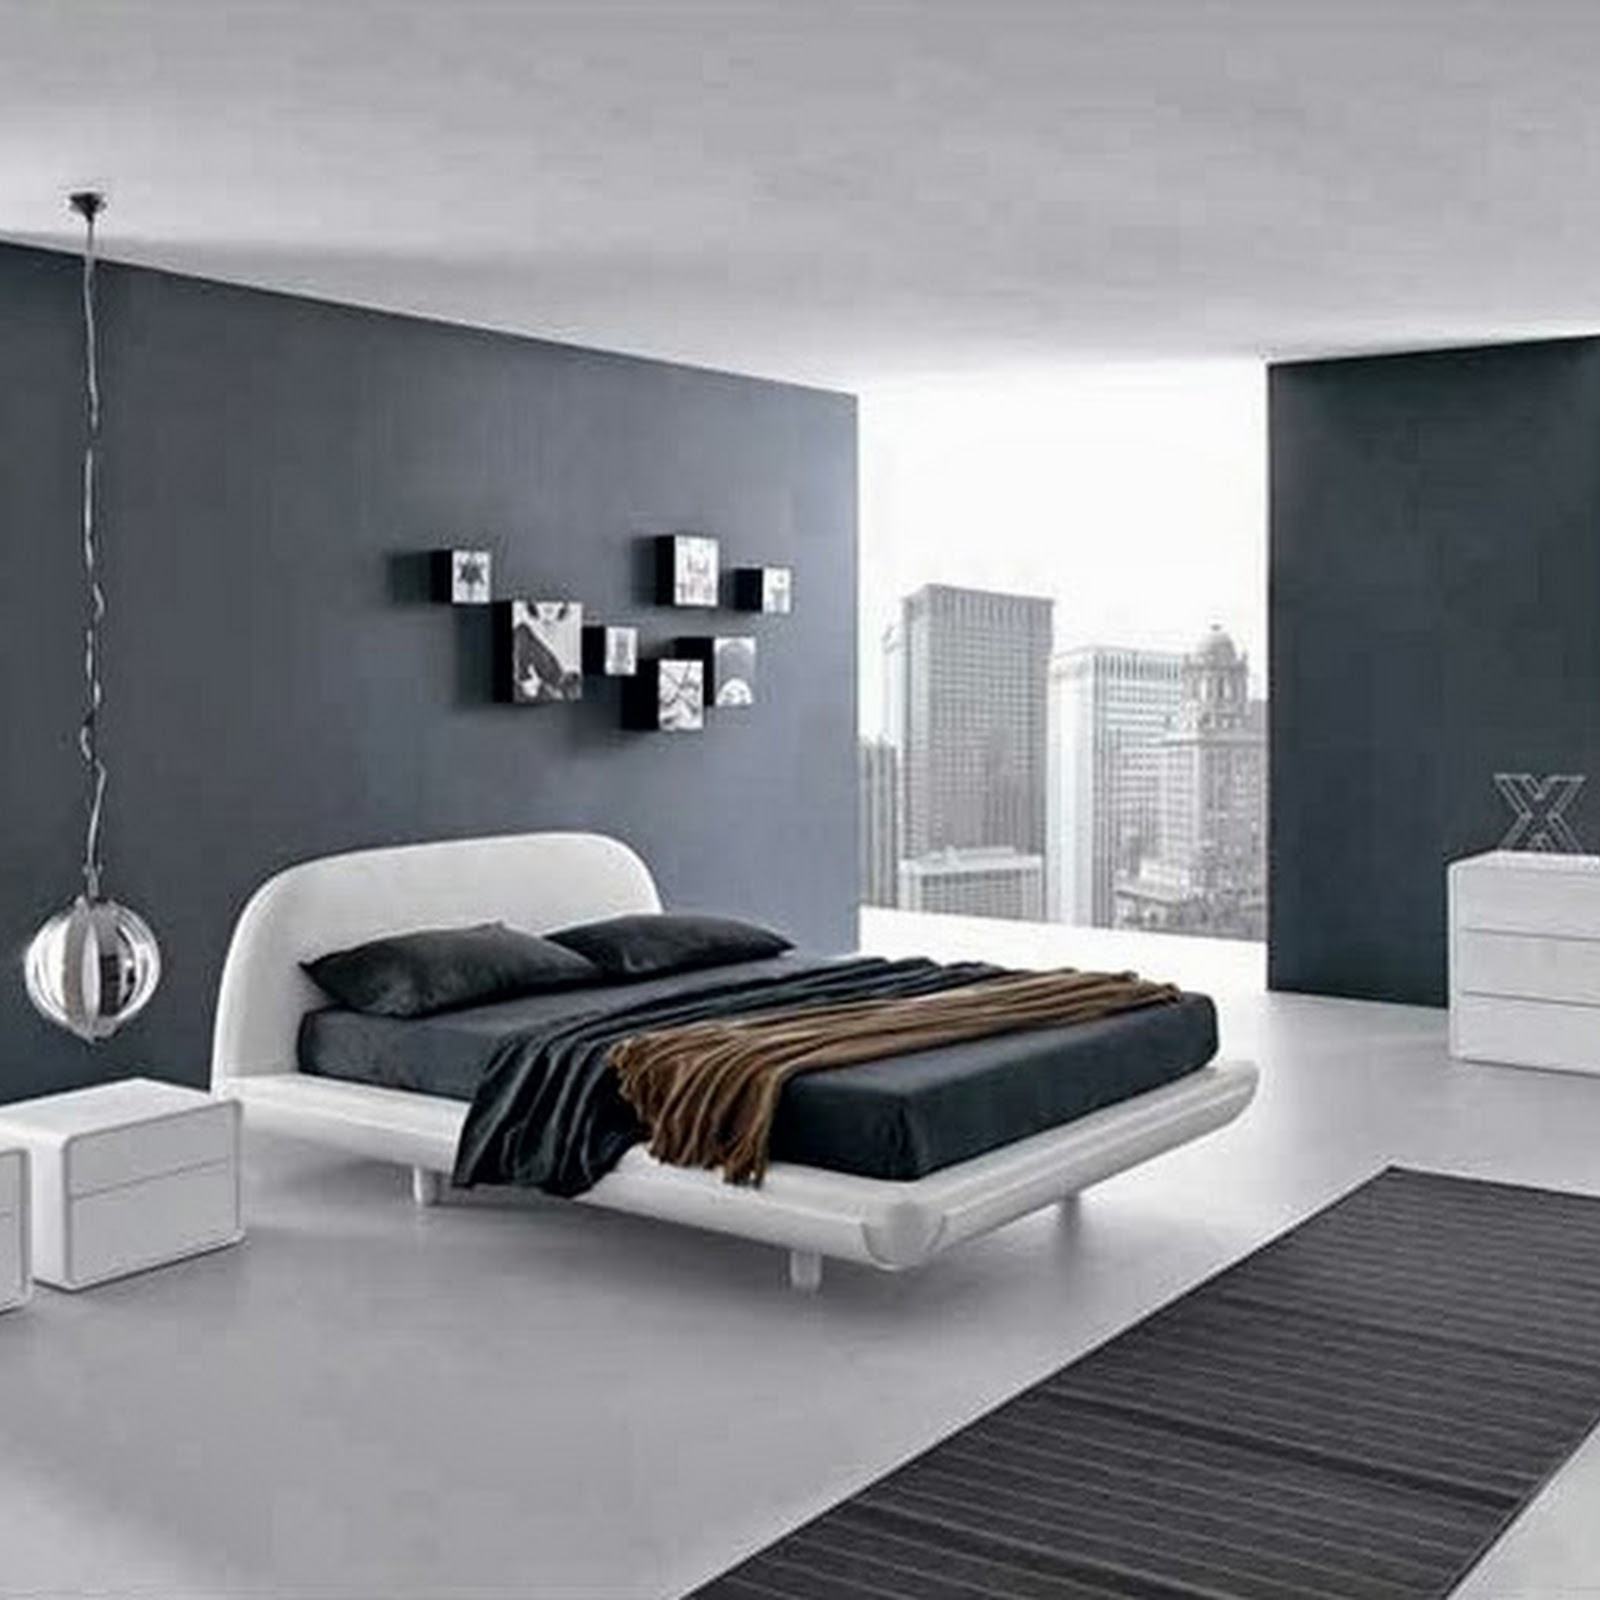 Bedroom Paint Color
 Elegant Gray Paint Colors for Bedrooms – HomesFeed